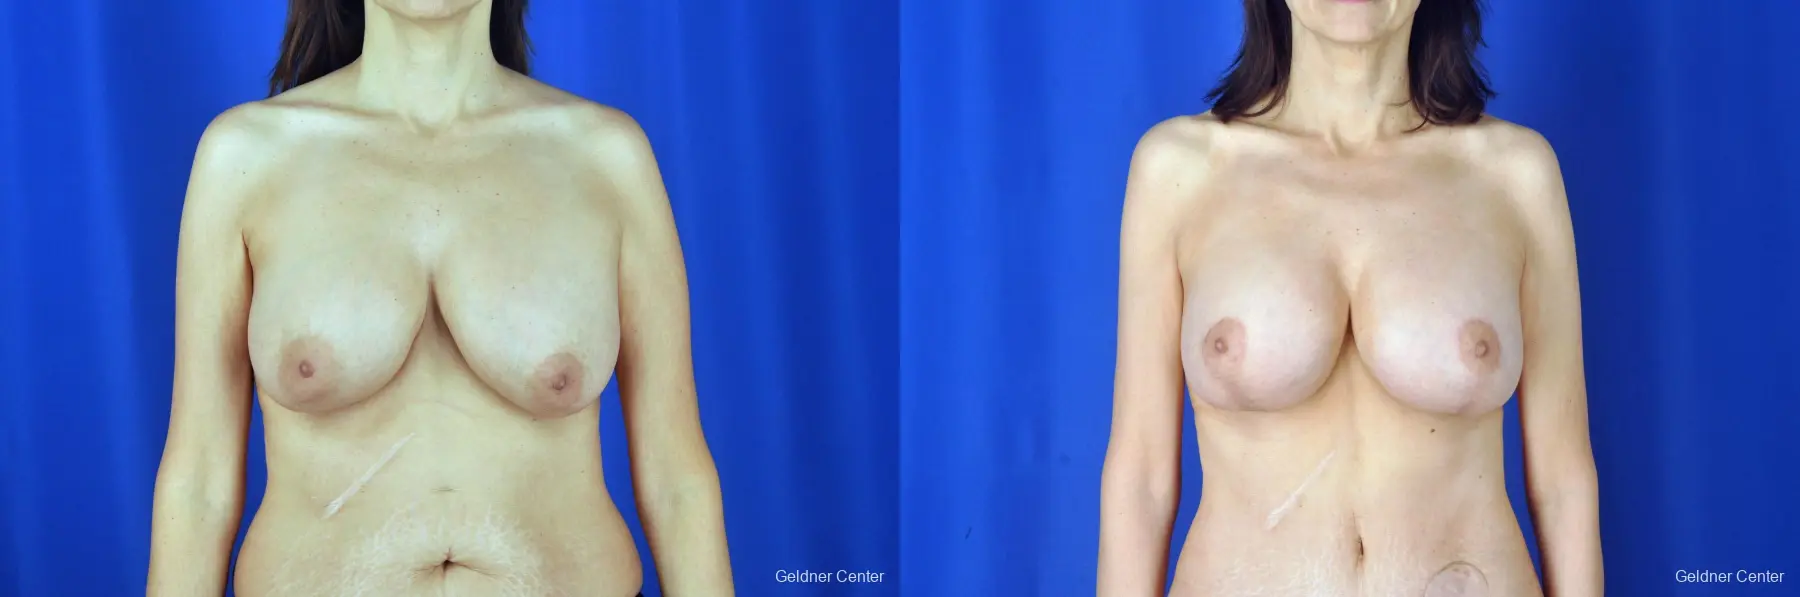 Breast Augmentation: Patient 6 - Before and After 1